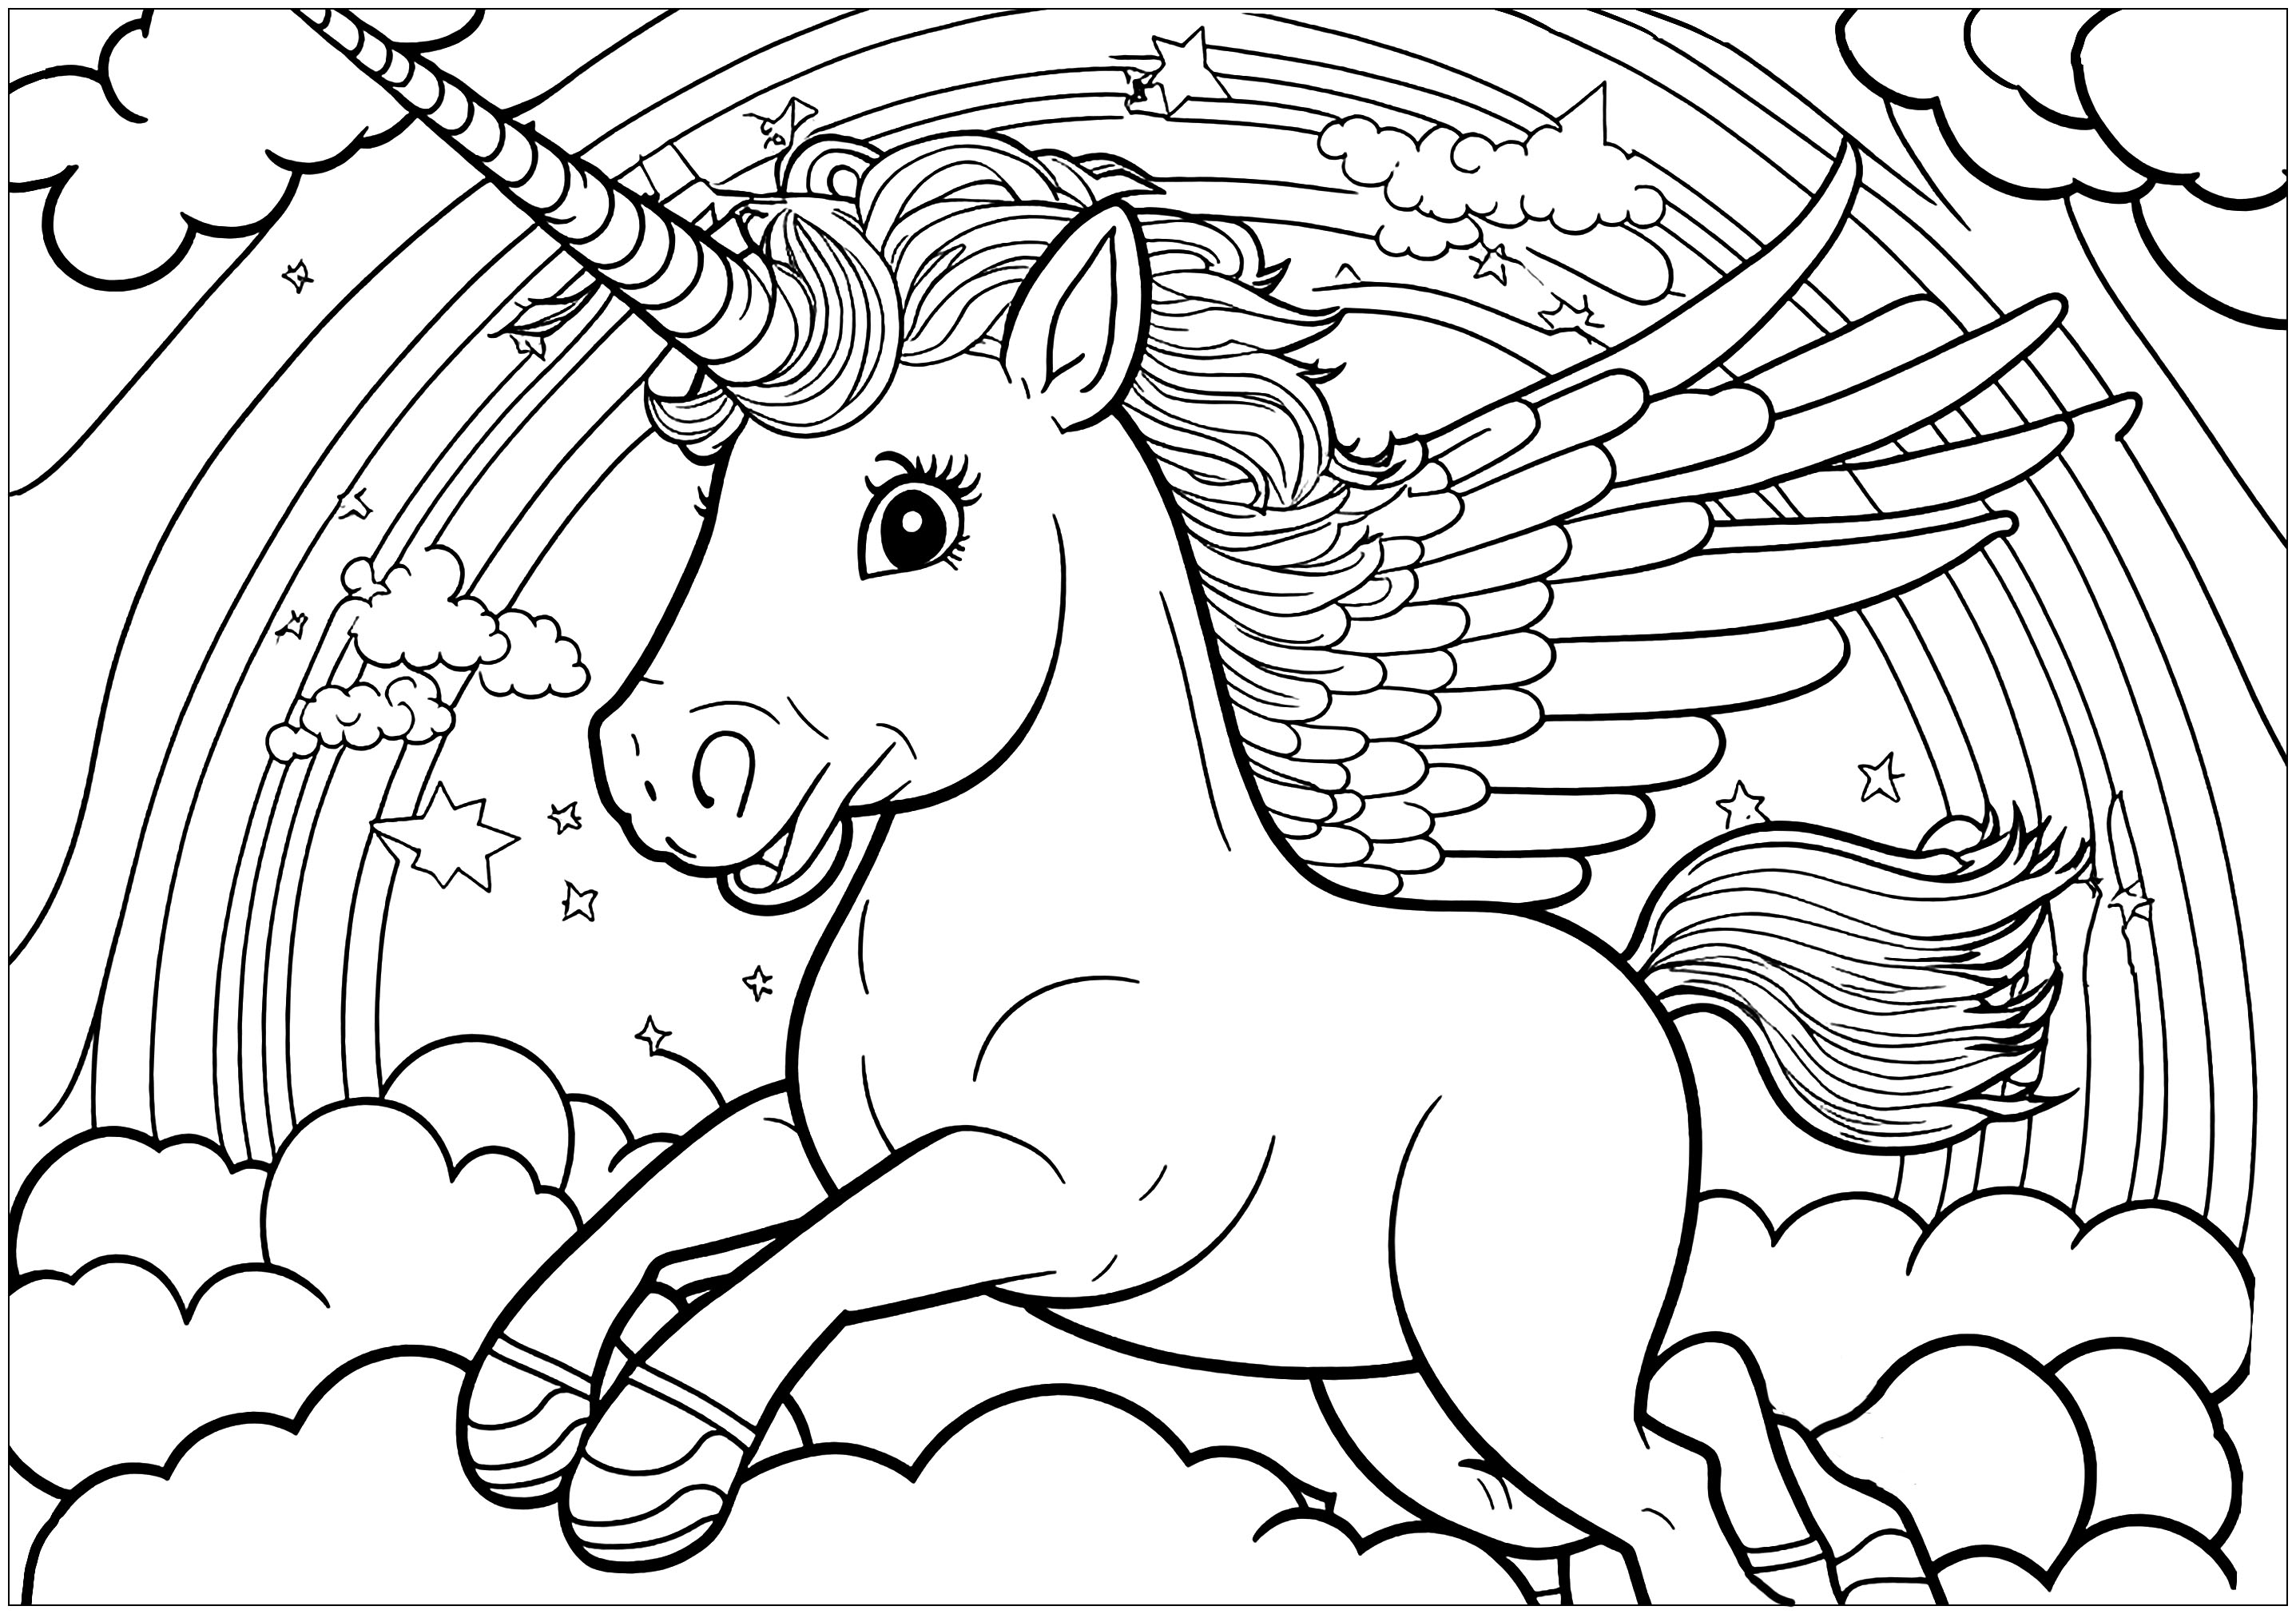 unicorn-in-the-sky-with-a-rainbow-unicorns-kids-coloring-pages